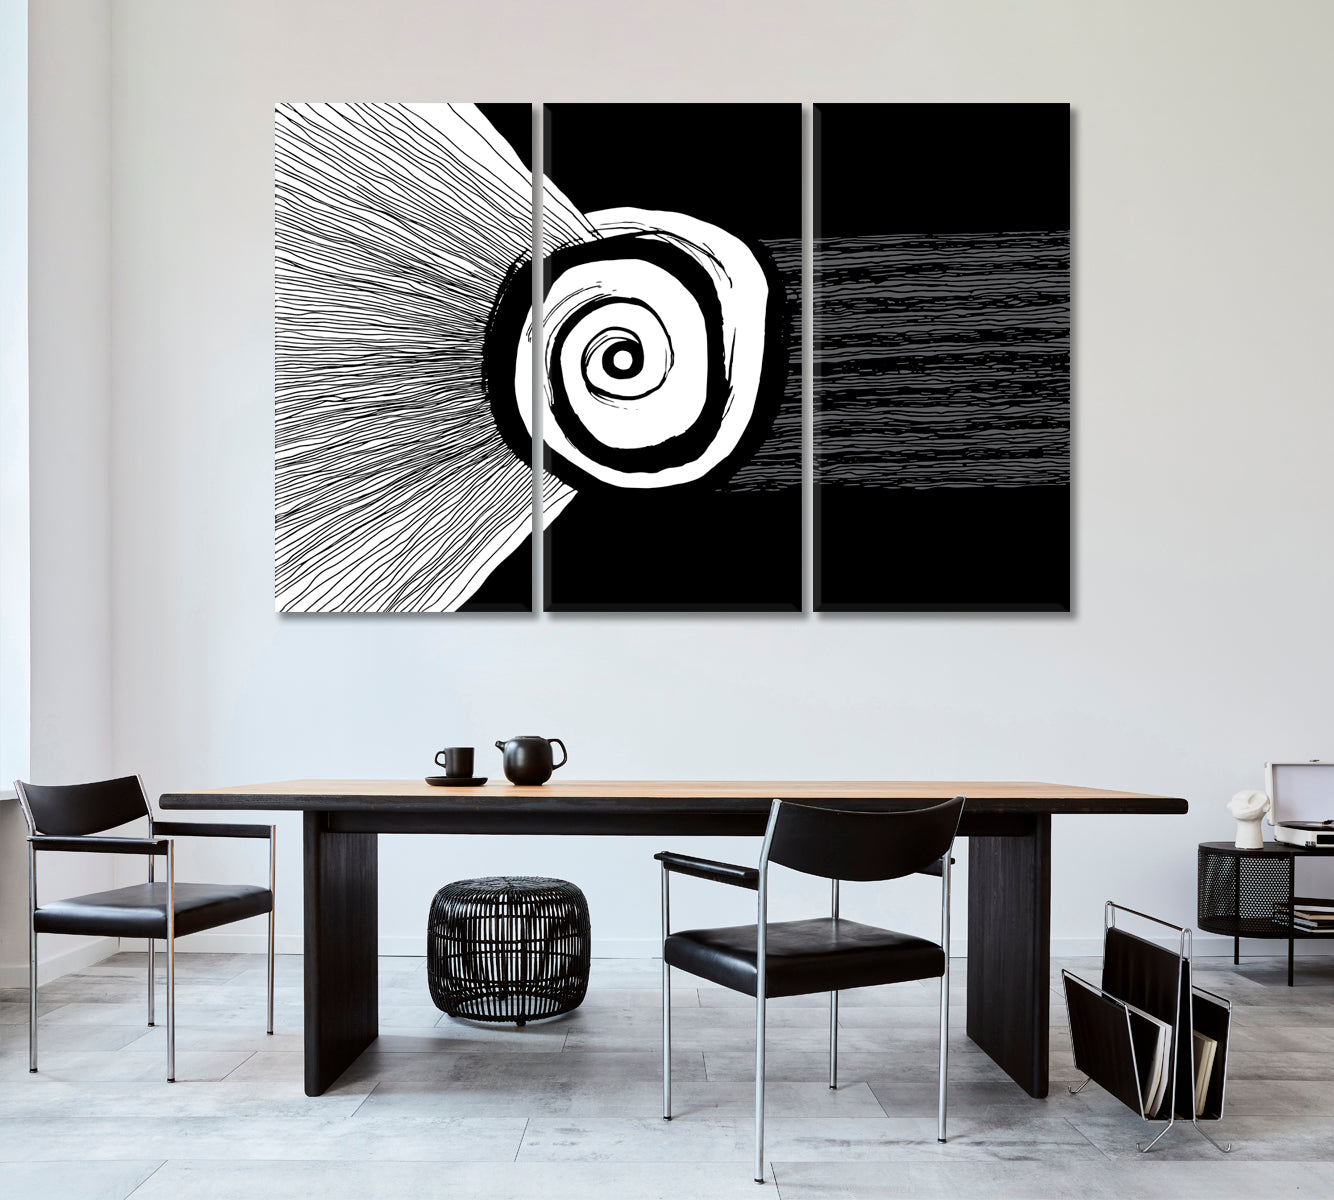 BLACK AND WHITE Geometric Modern Abstract Art Contemporary Art Artesty 3 panels 36" x 24" 